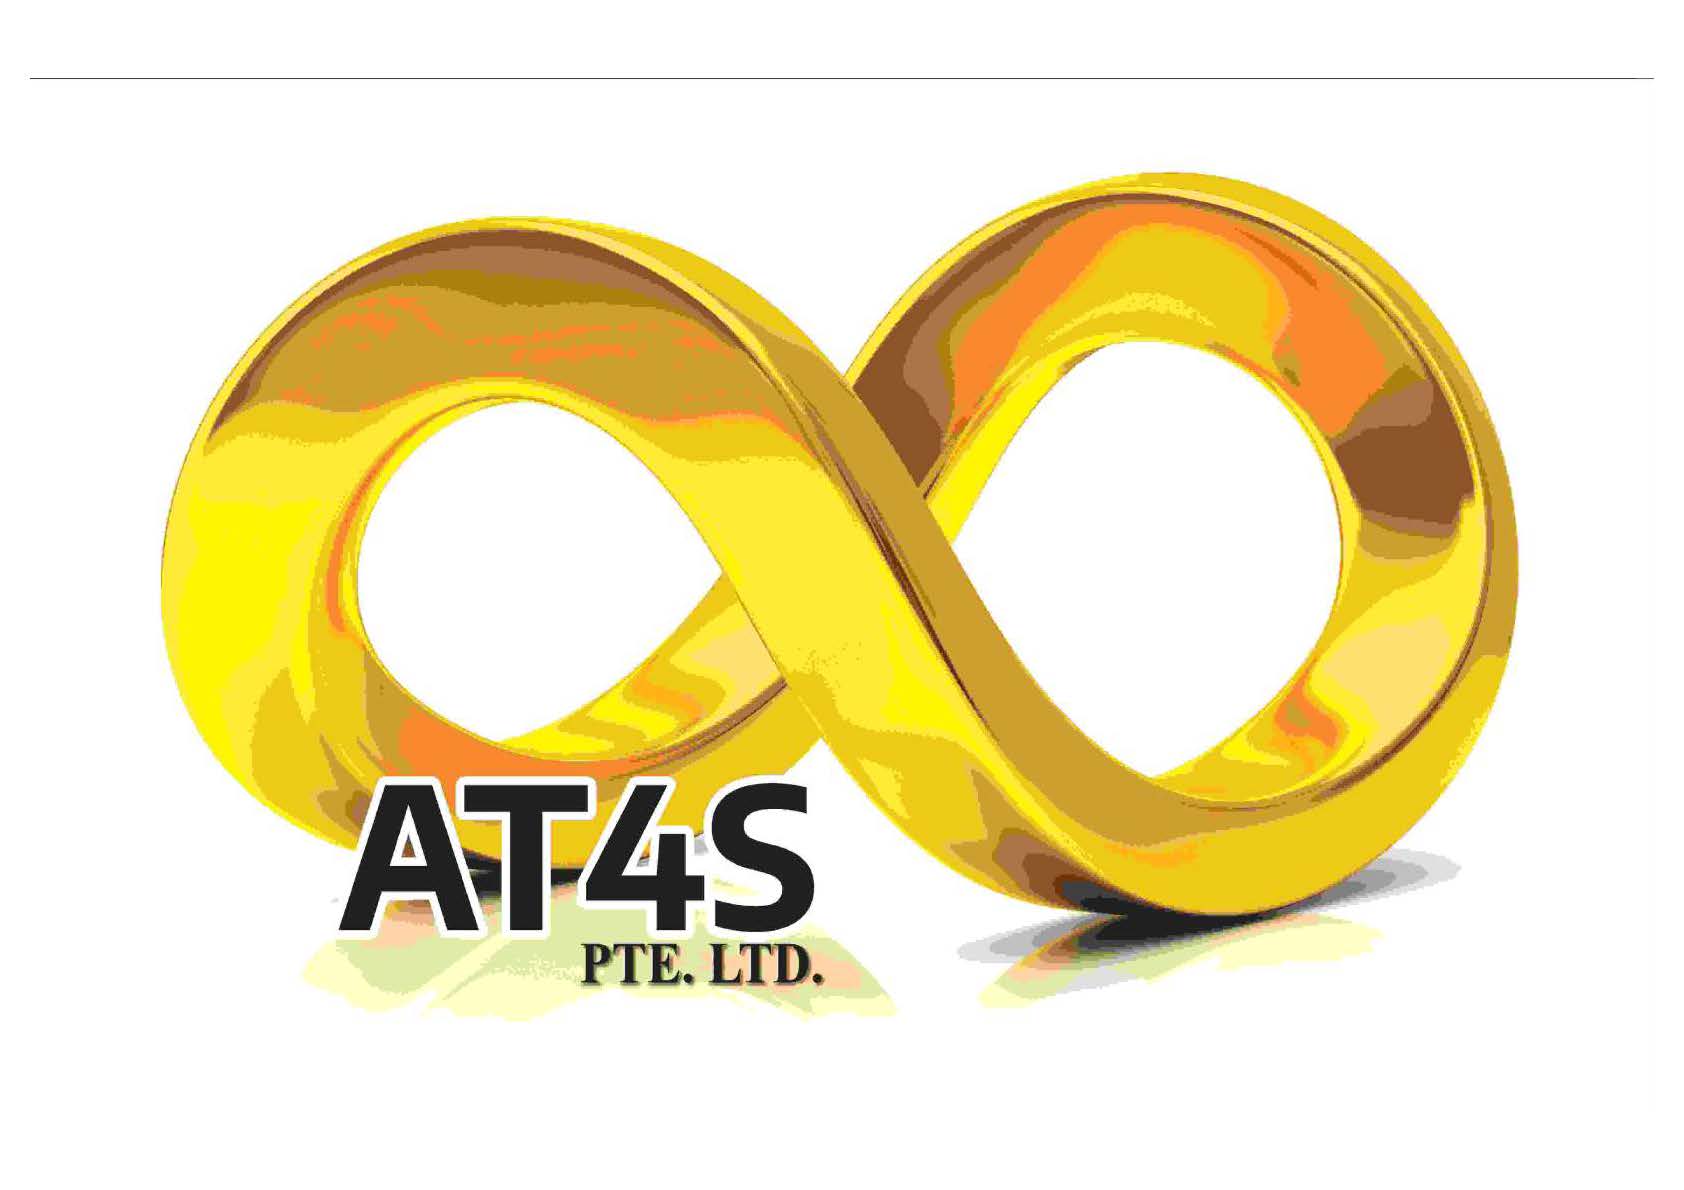 Company logo for At4s Pte. Ltd.